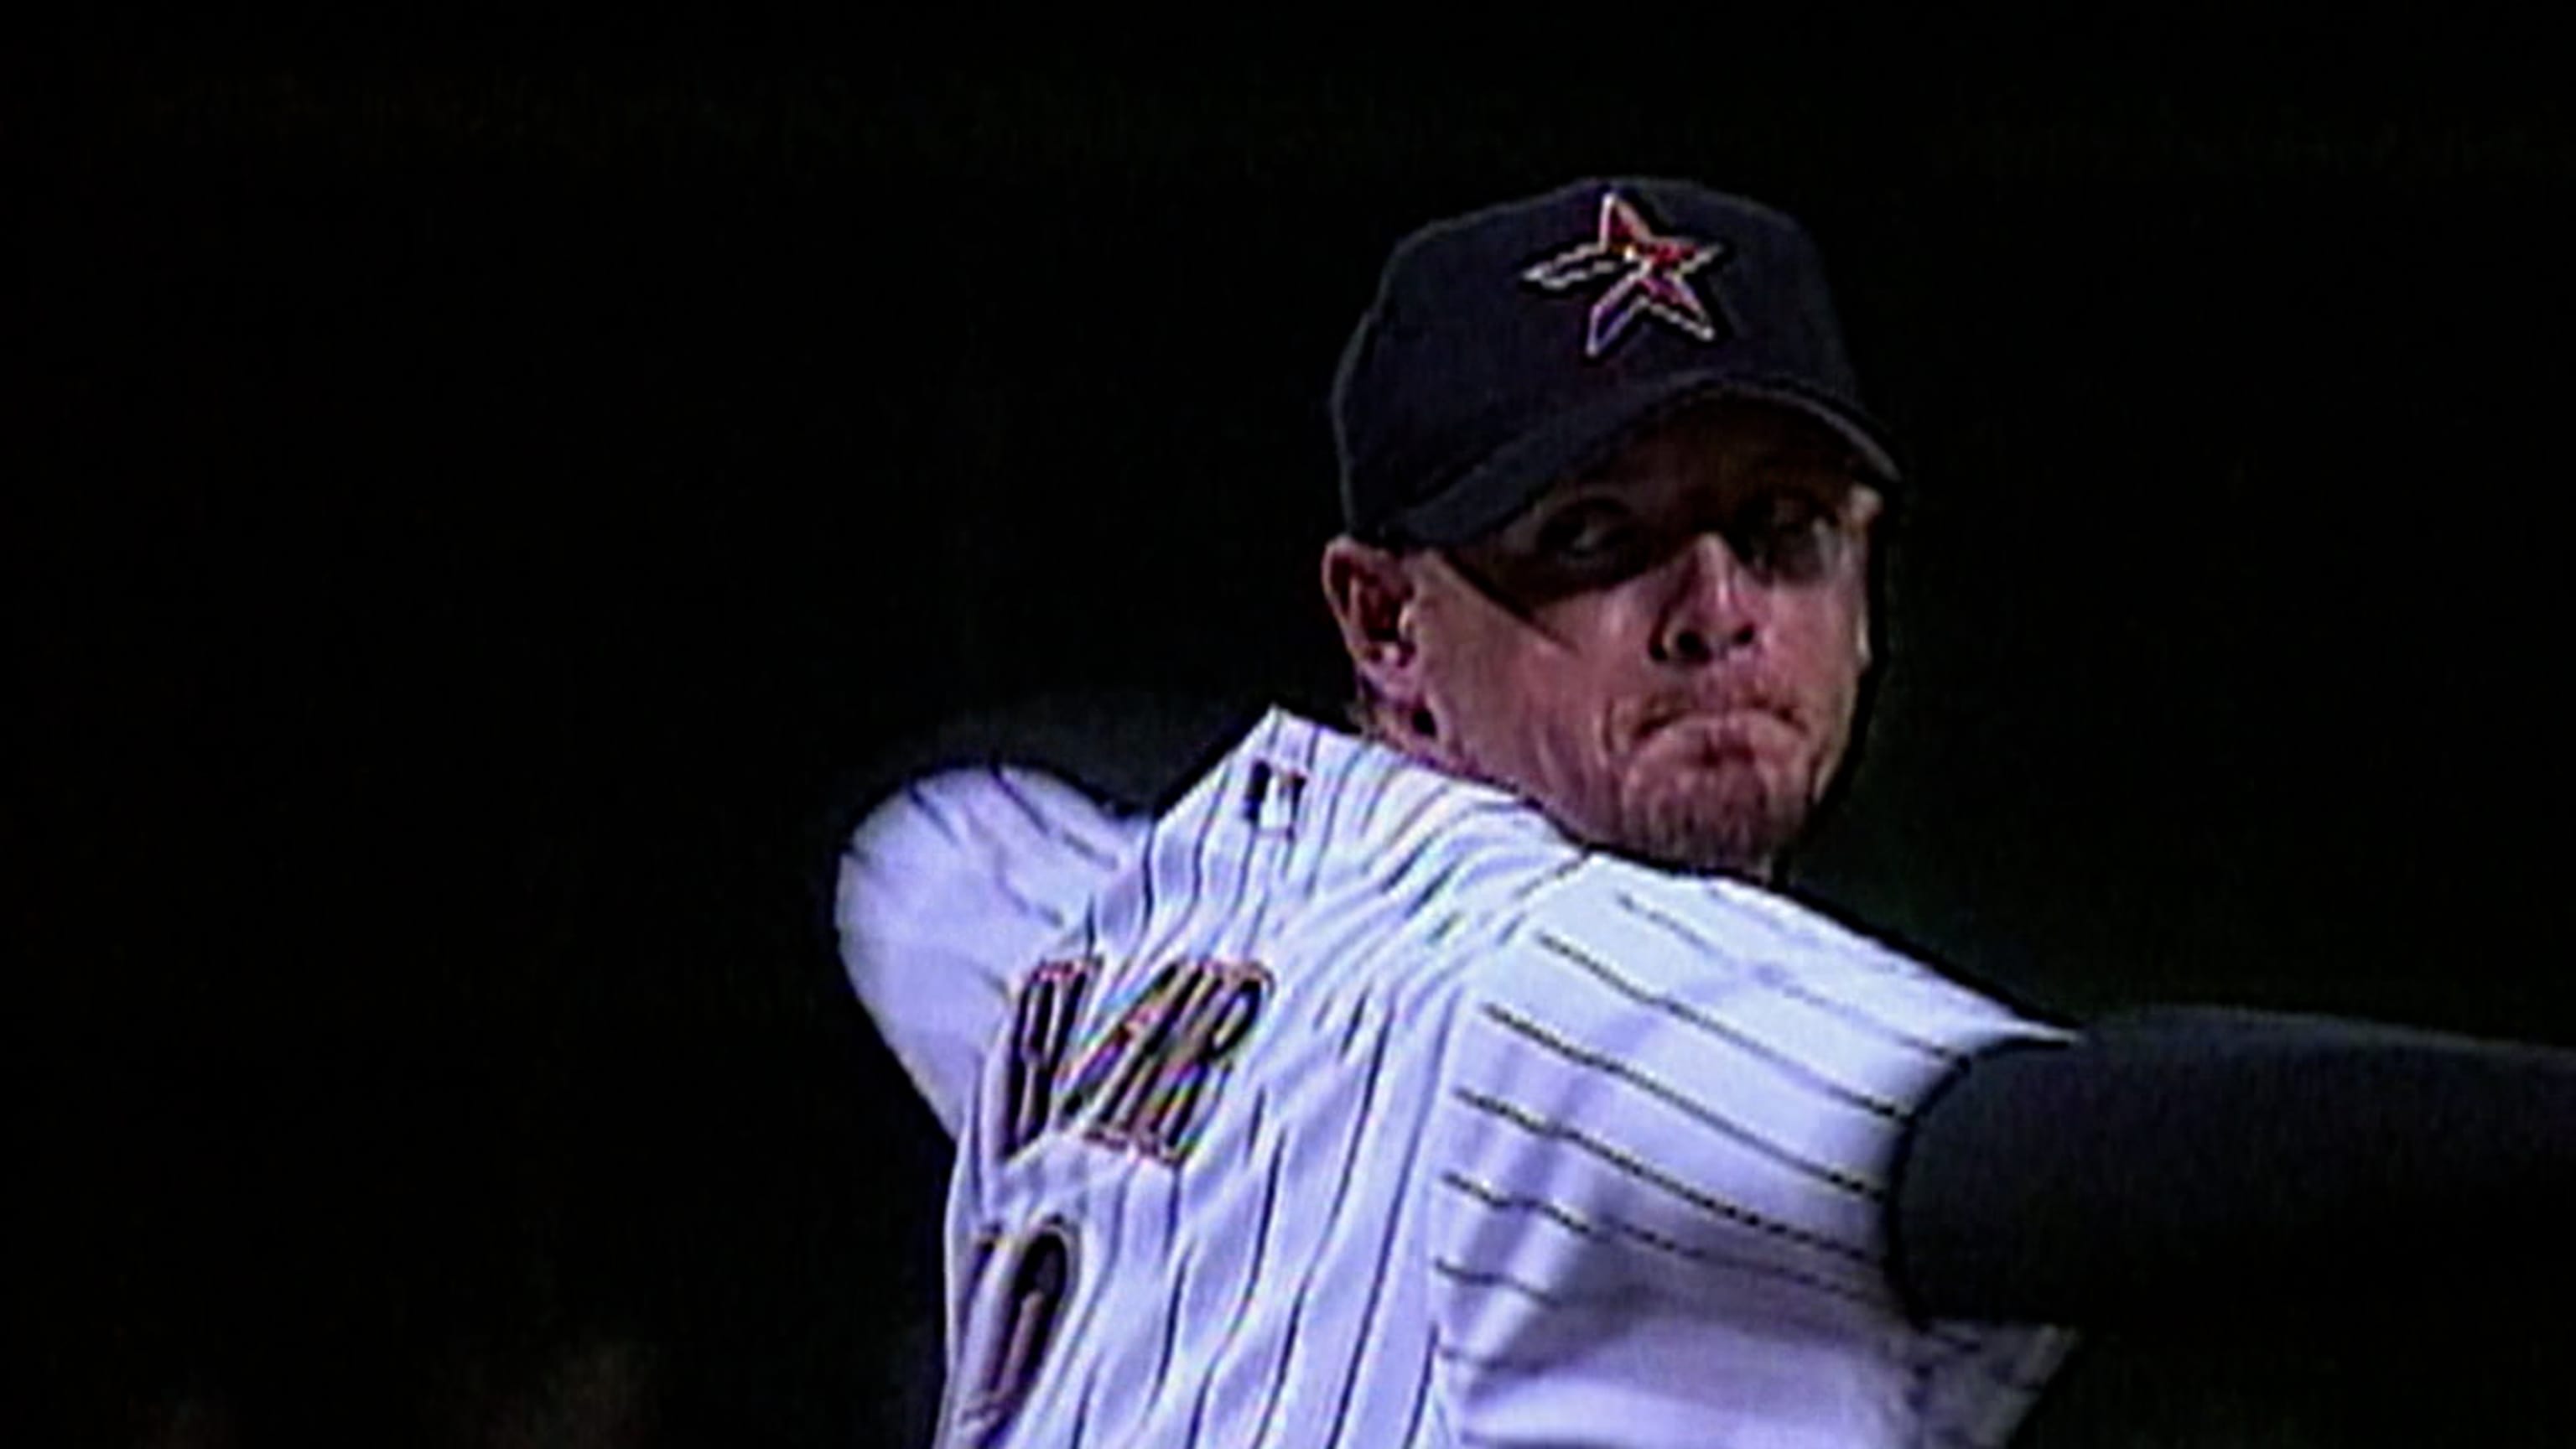 Mariano Rivera, Billy Wagner, and a Hall of Fame standard - Pinstripe Alley